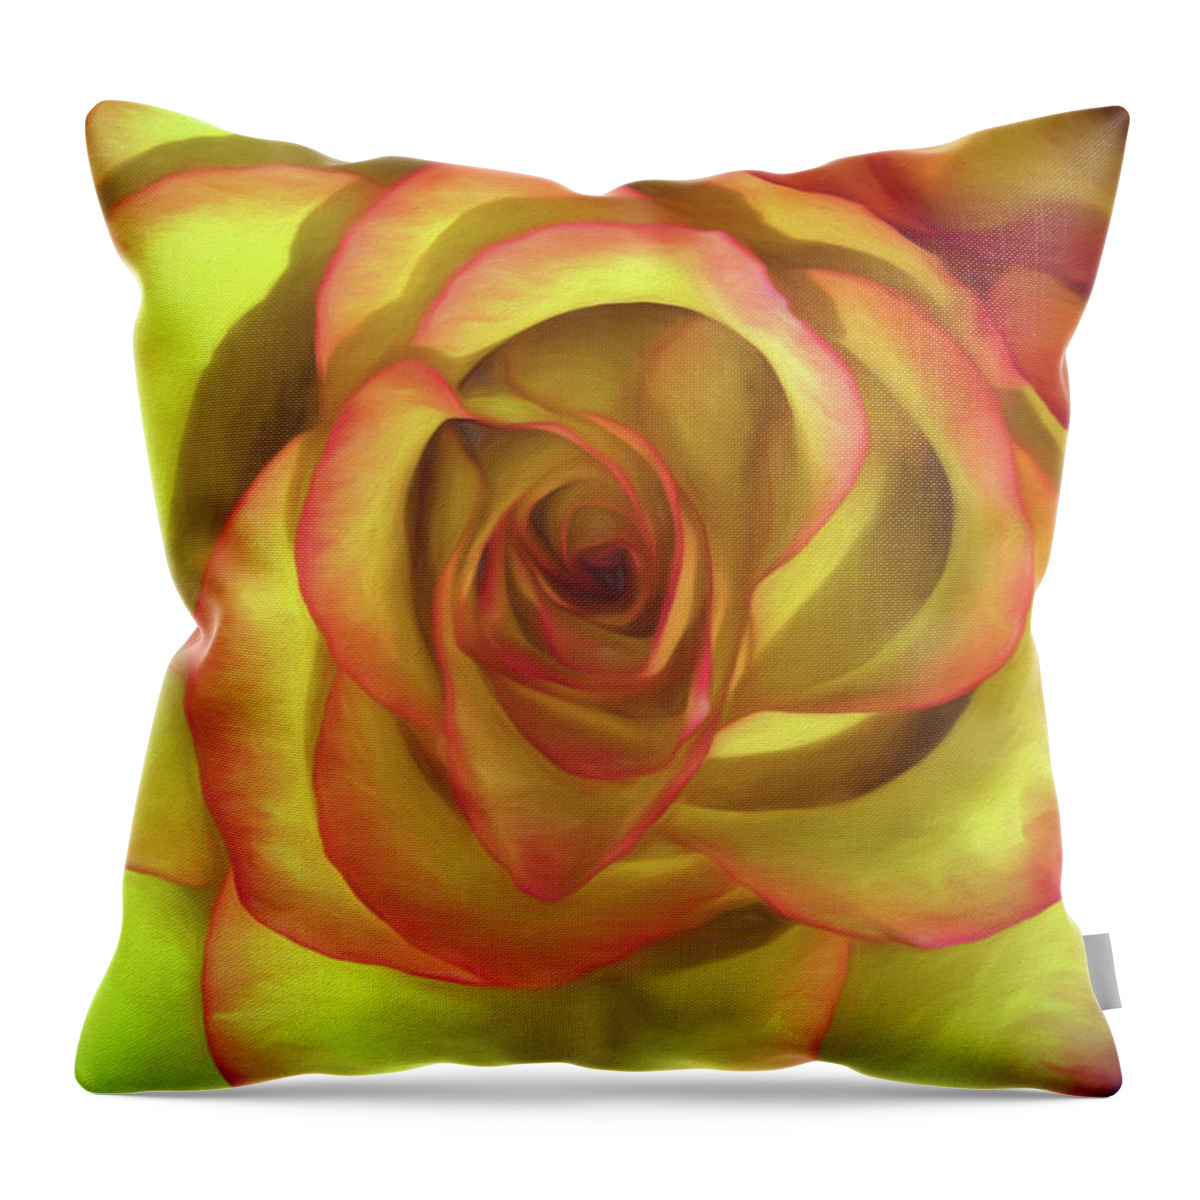 Topaz Impressions Throw Pillow featuring the photograph Vivid Rose by John Roach